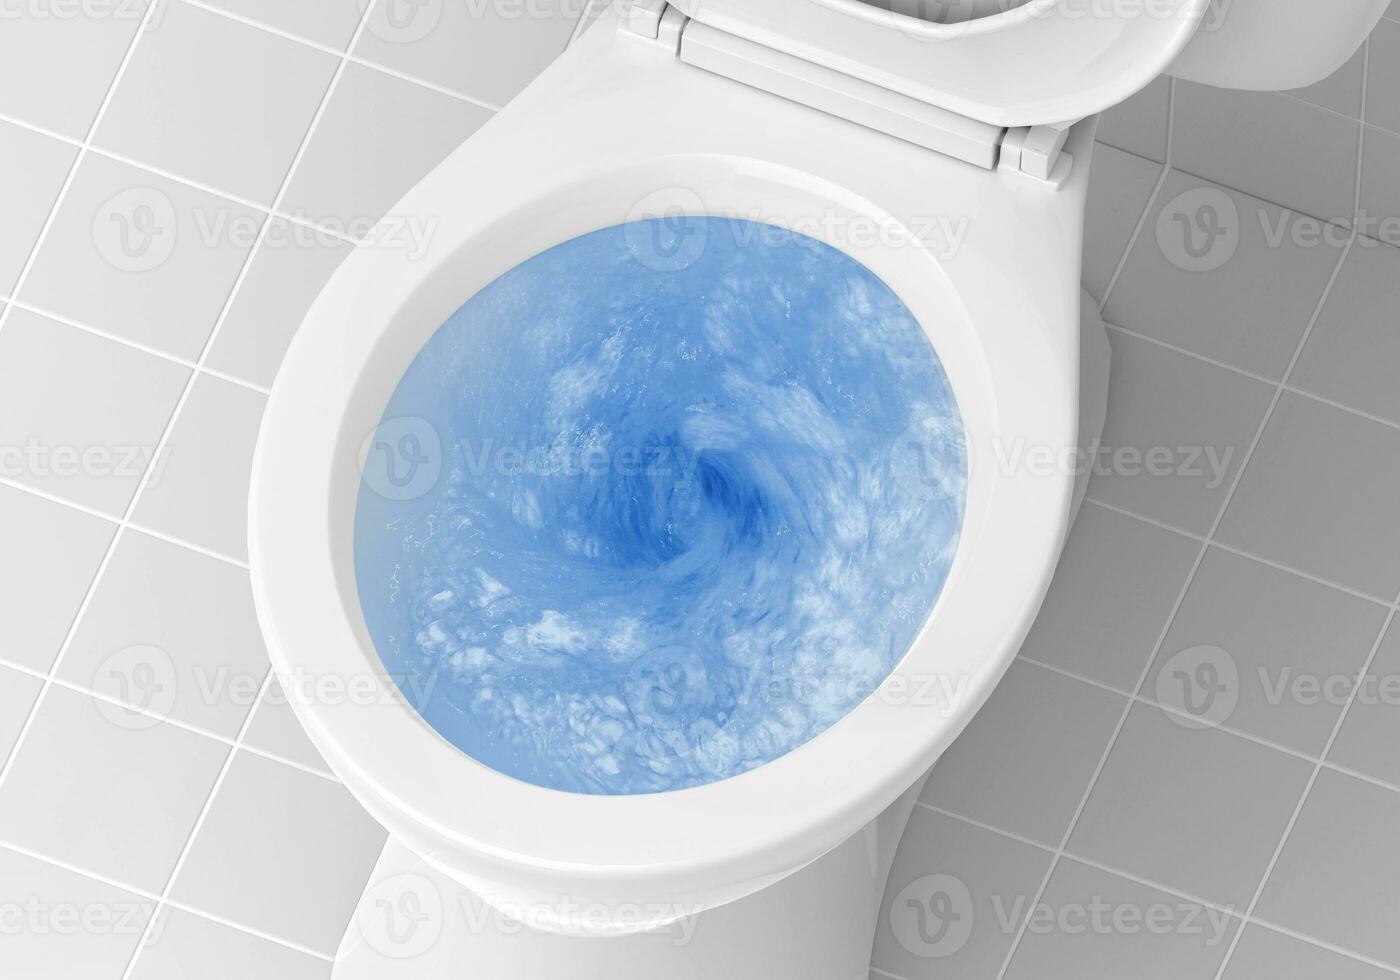 Top view of toilet bowl, blue detergent flushing in it photo